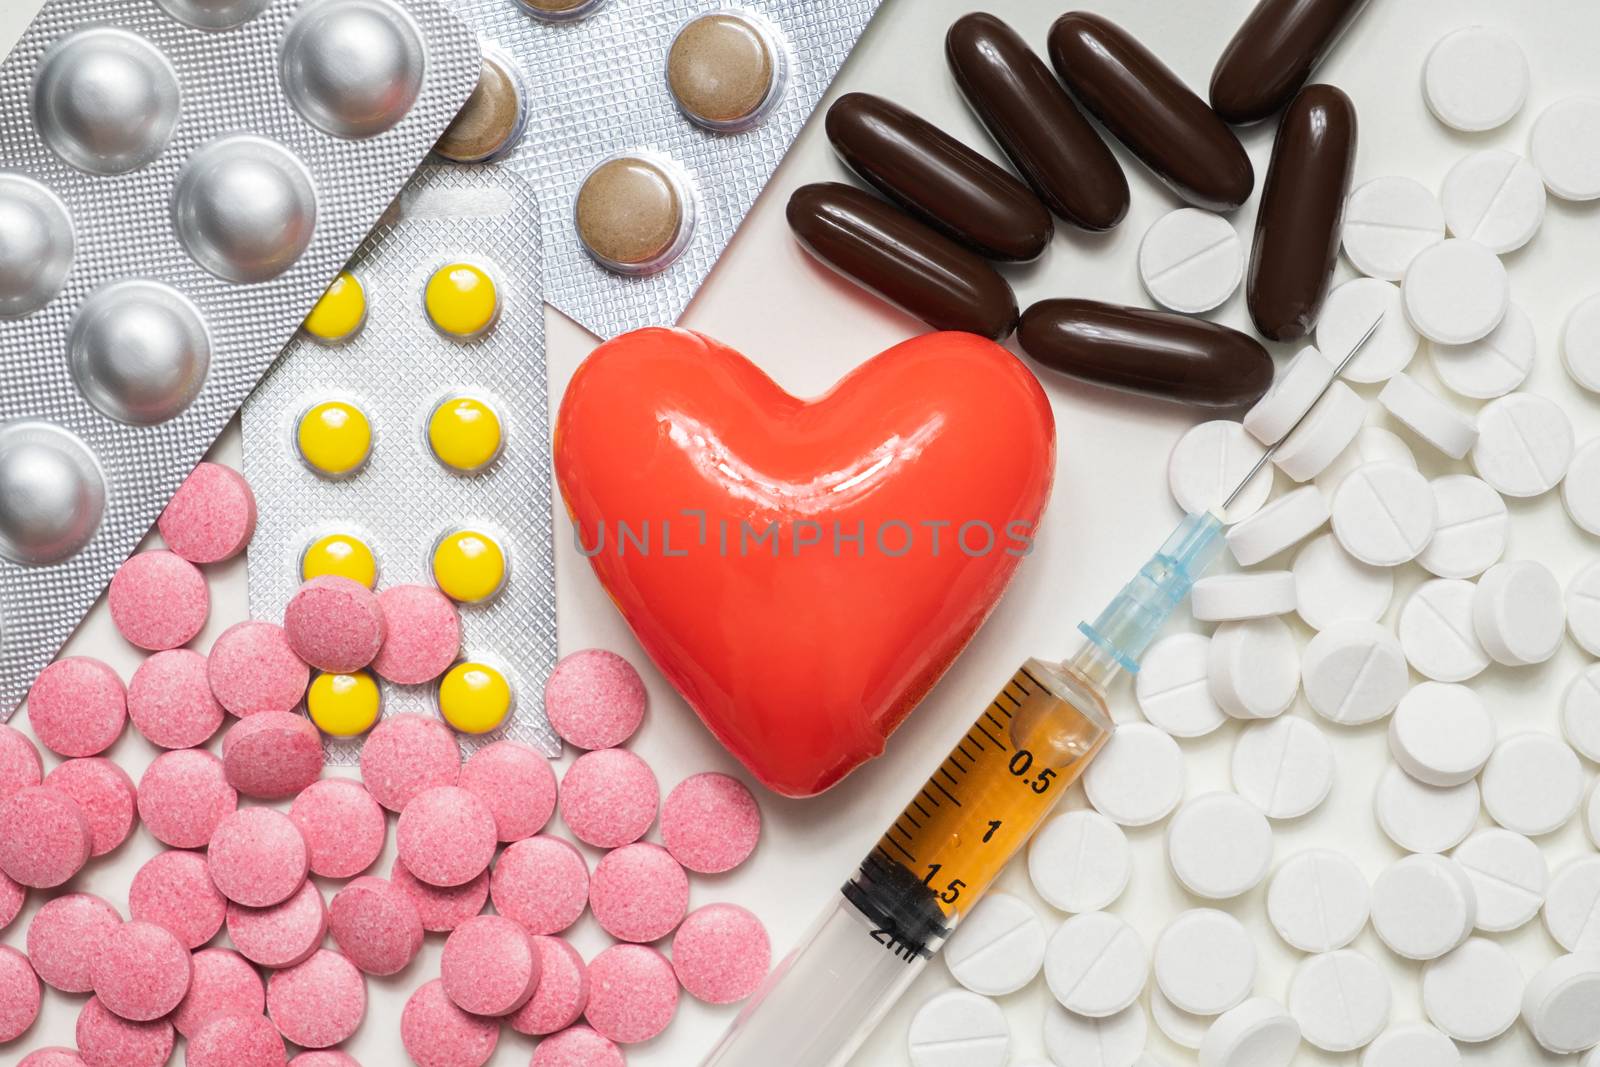 Heart and pills with syringe on white background, top view. Cardiology, heart disease concept.